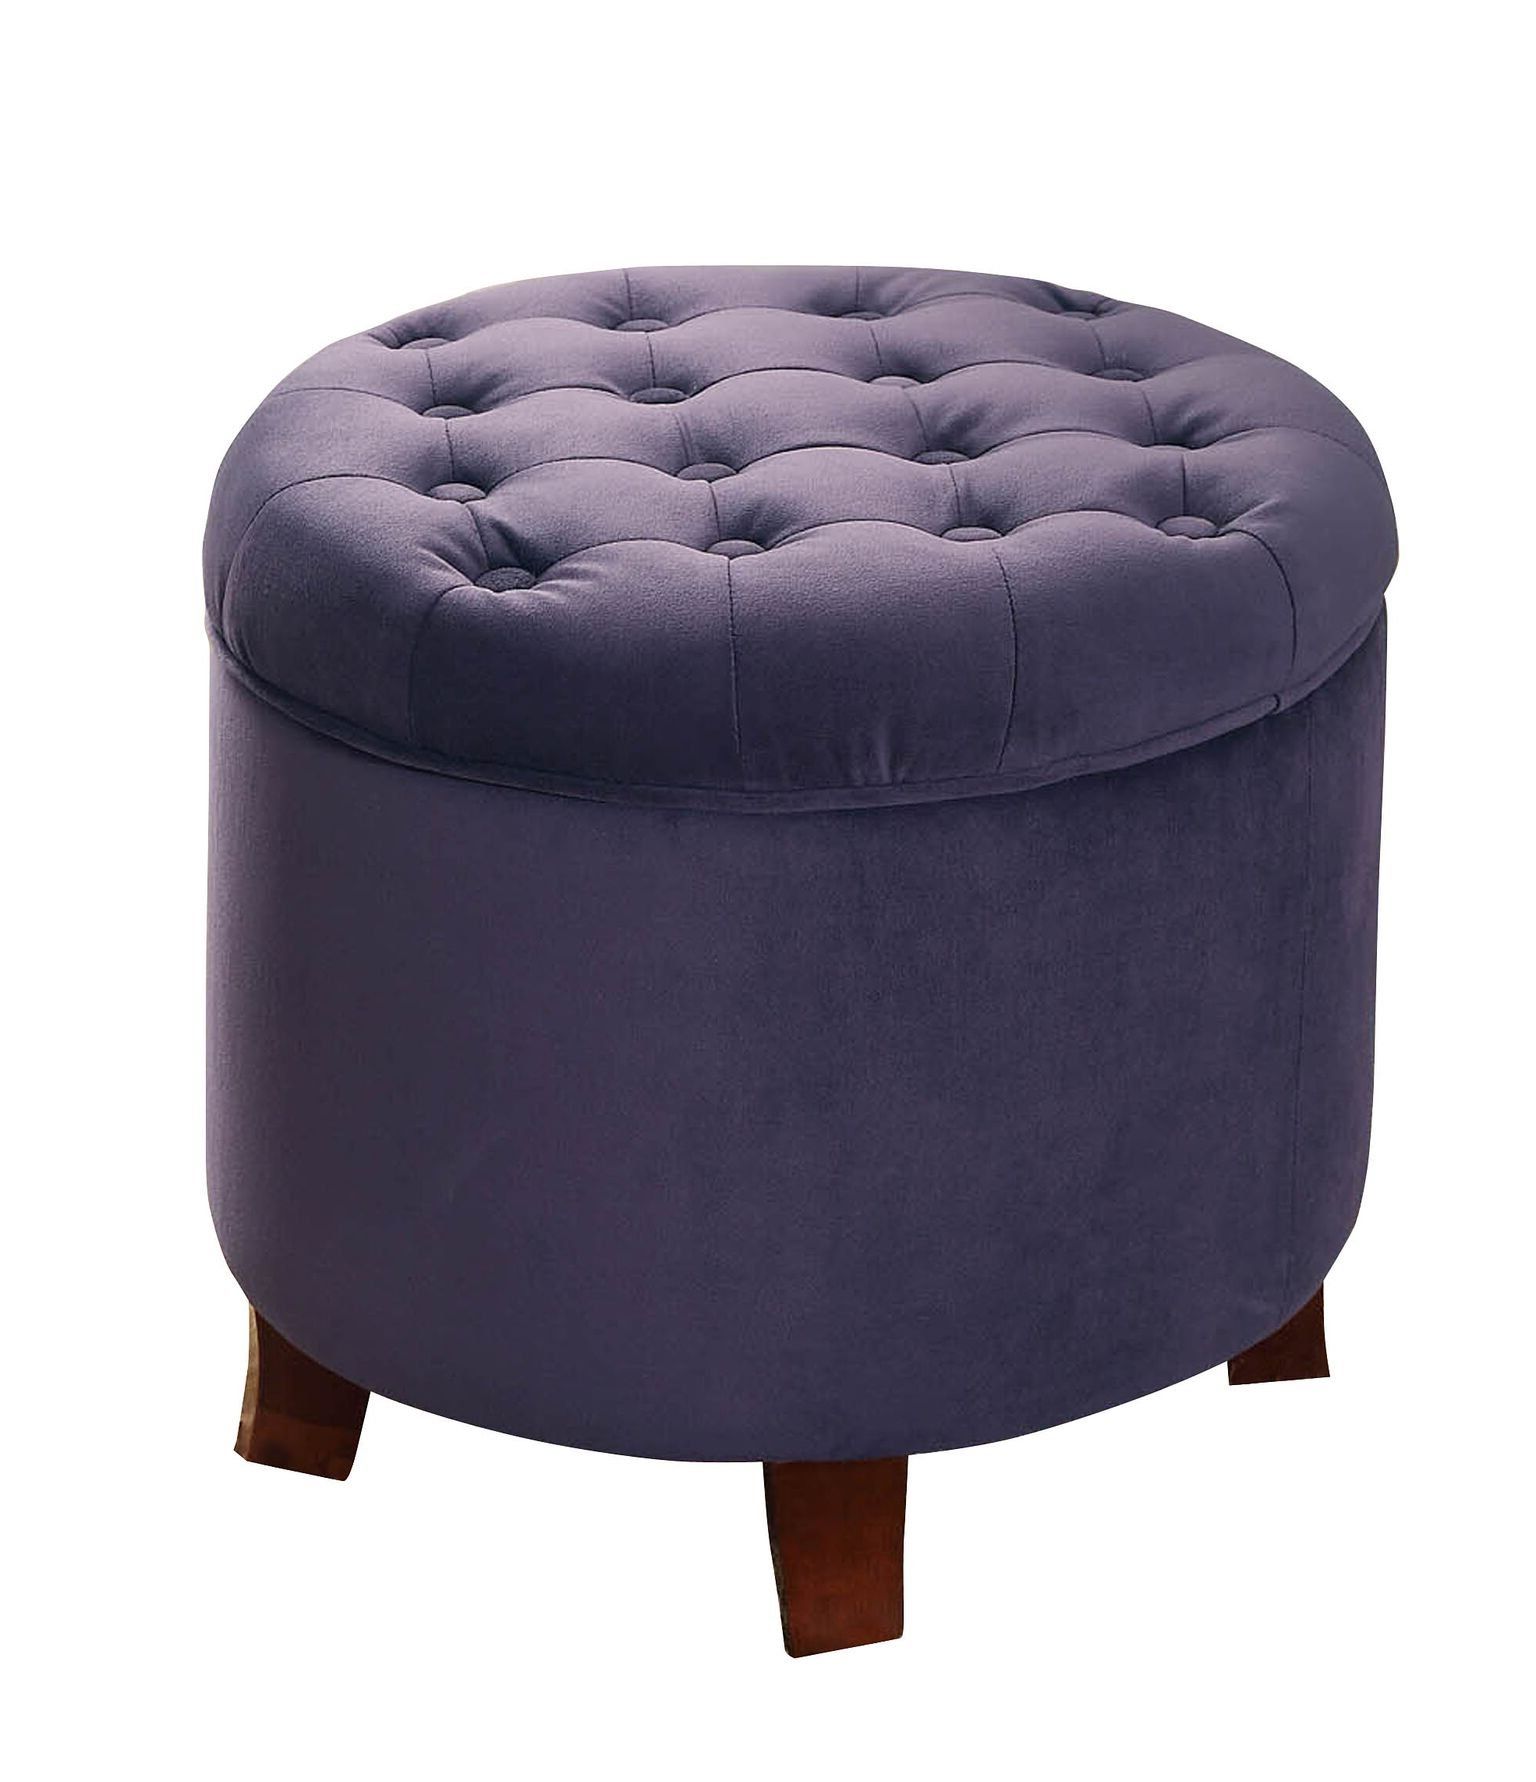 Well Liked Homepop Velvet Tufted Round Storage Ottoman With Removable Lid, Purple Throughout Cream Fabric Tufted Round Storage Ottomans (View 9 of 10)